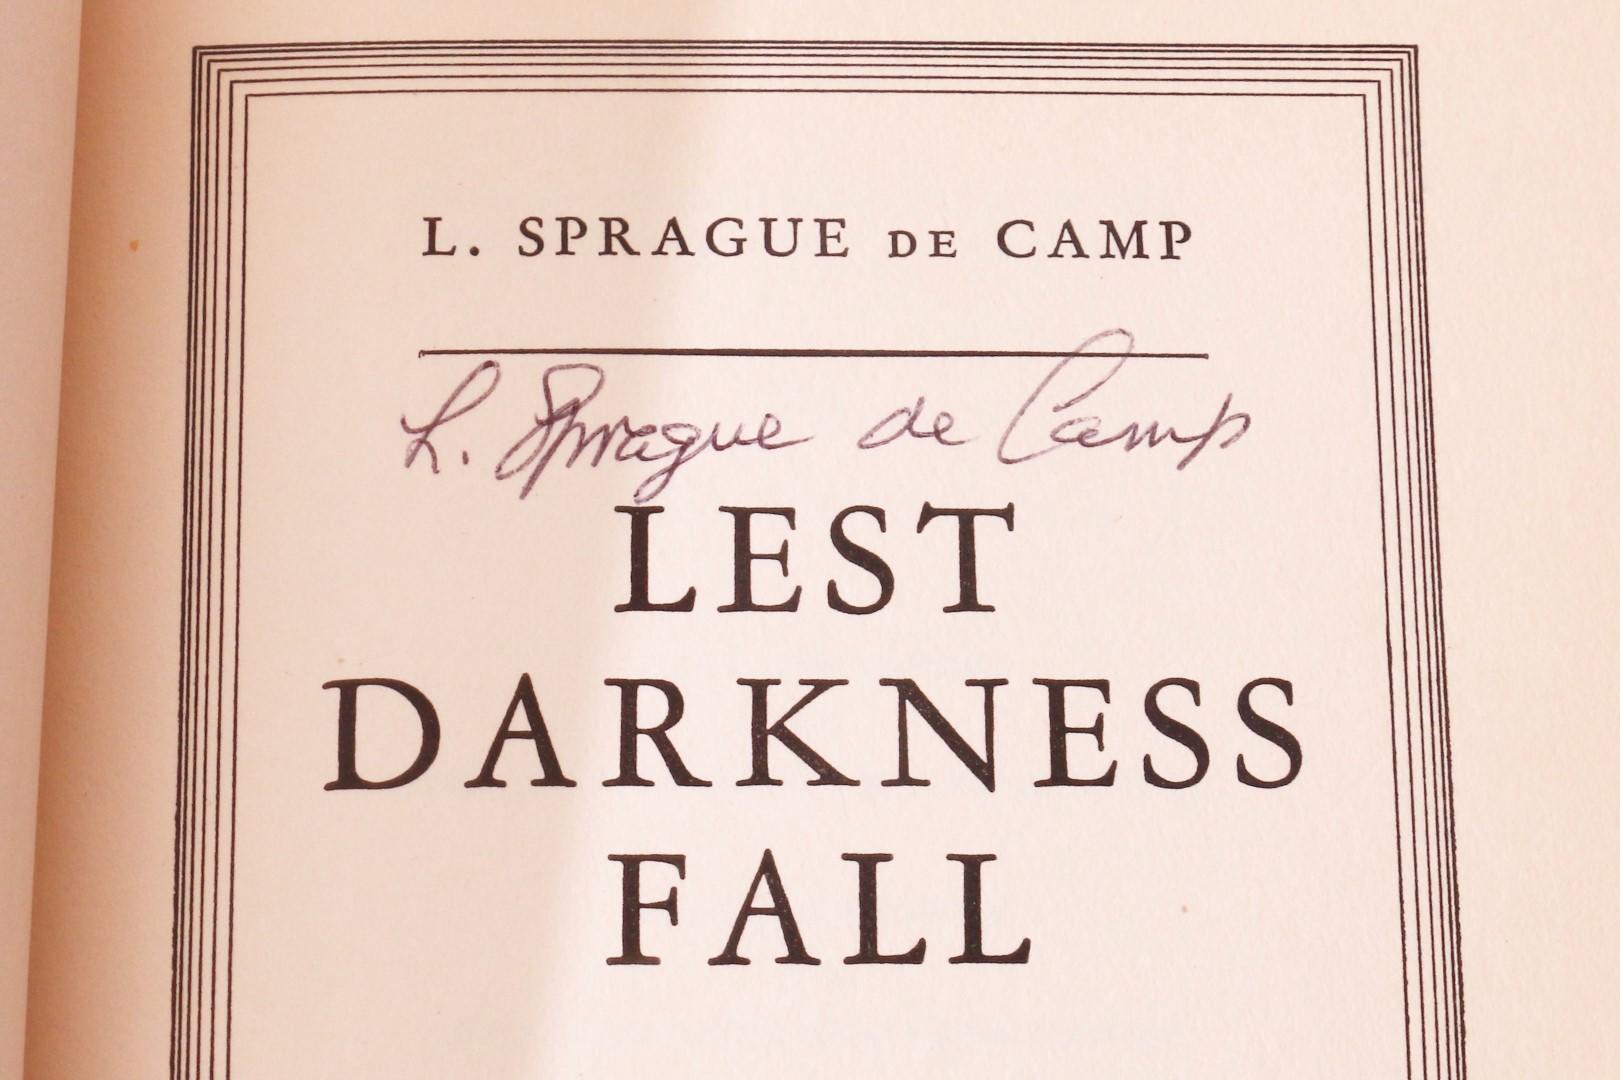 L. Sprague de Camp - Lest Darkness Fall - Holt, Rinehart and Winston, 1941, Signed First Edition.